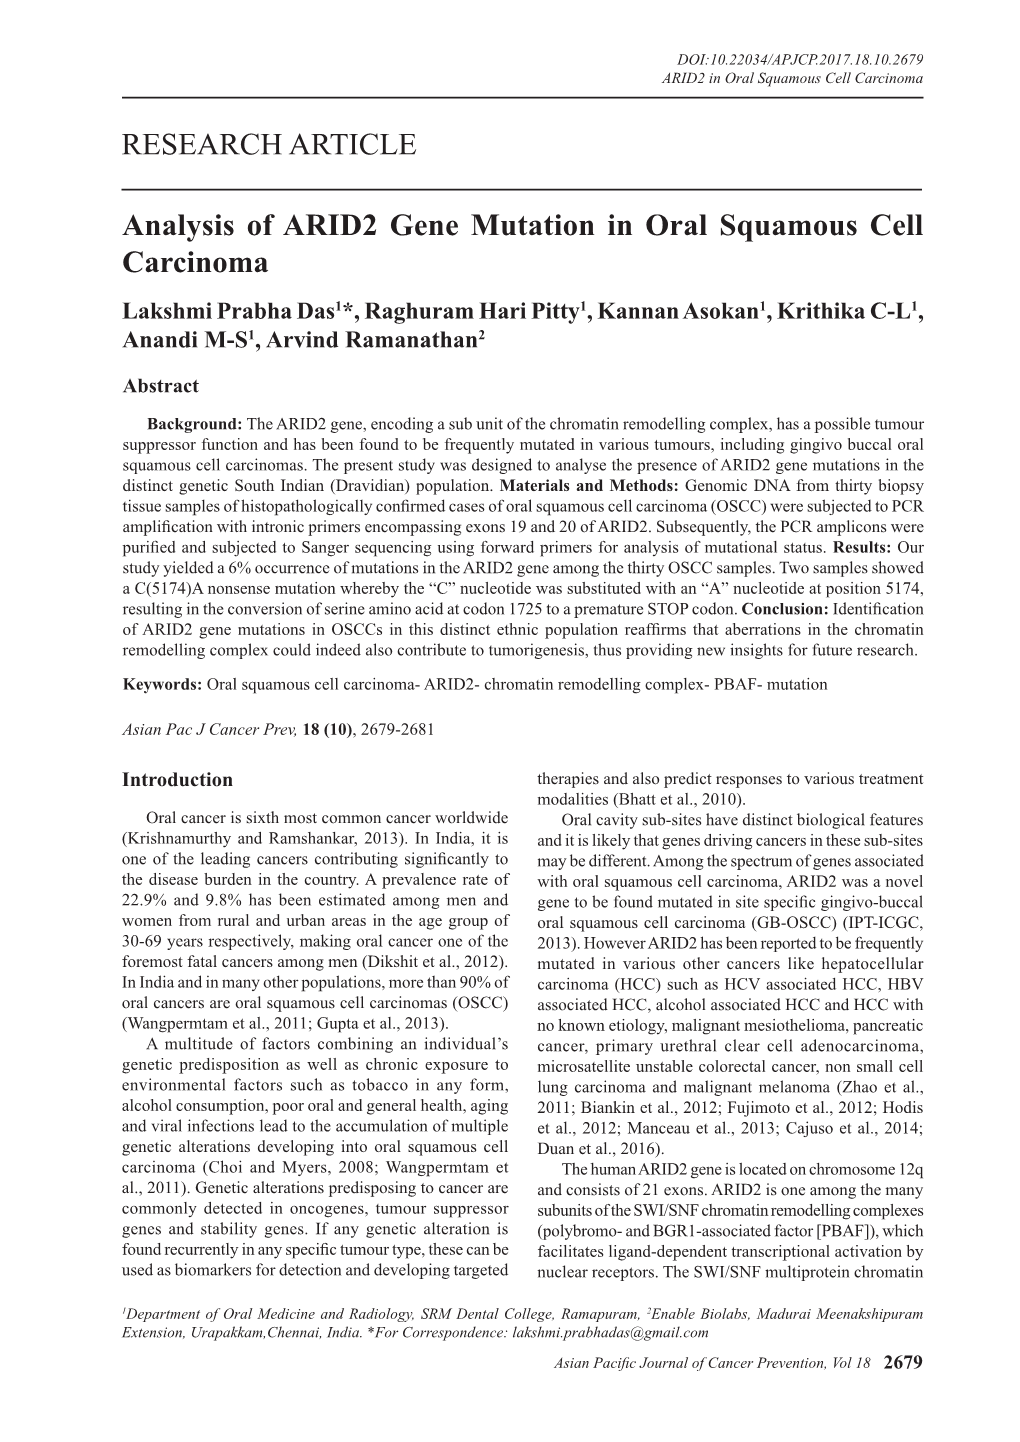 RESEARCH ARTICLE Analysis of ARID2 Gene Mutation in Oral